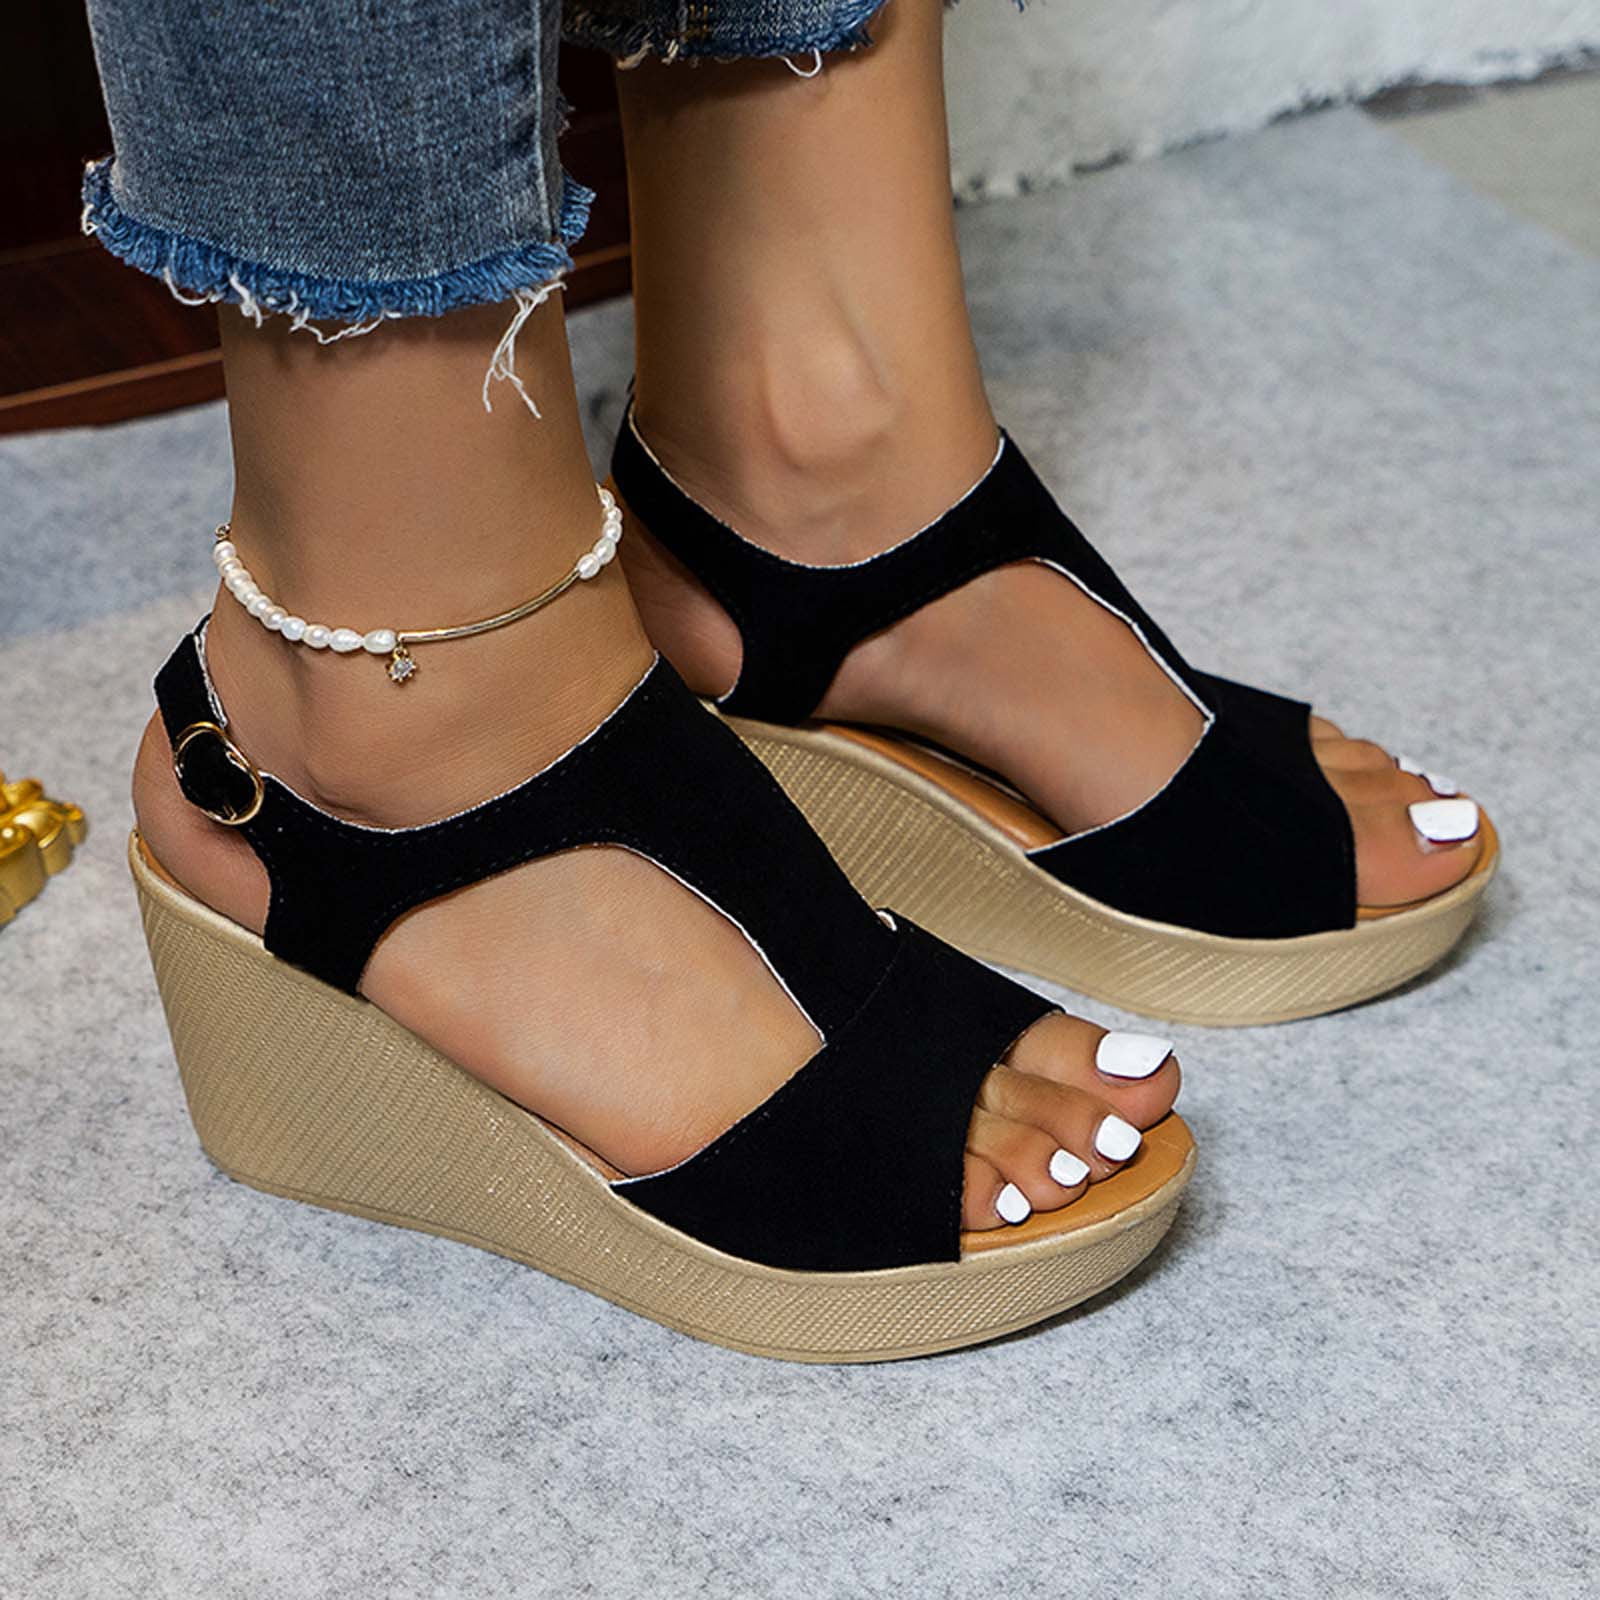 Women Wedges Sandals Summer Mixed Colors Platform Sandals, Women Wedge  Sandals, Ladies Wedge Sandals, Girls Wedge Sandals, वैज सैंडल - My Online  Collection Store, Bengaluru | ID: 2851553439973